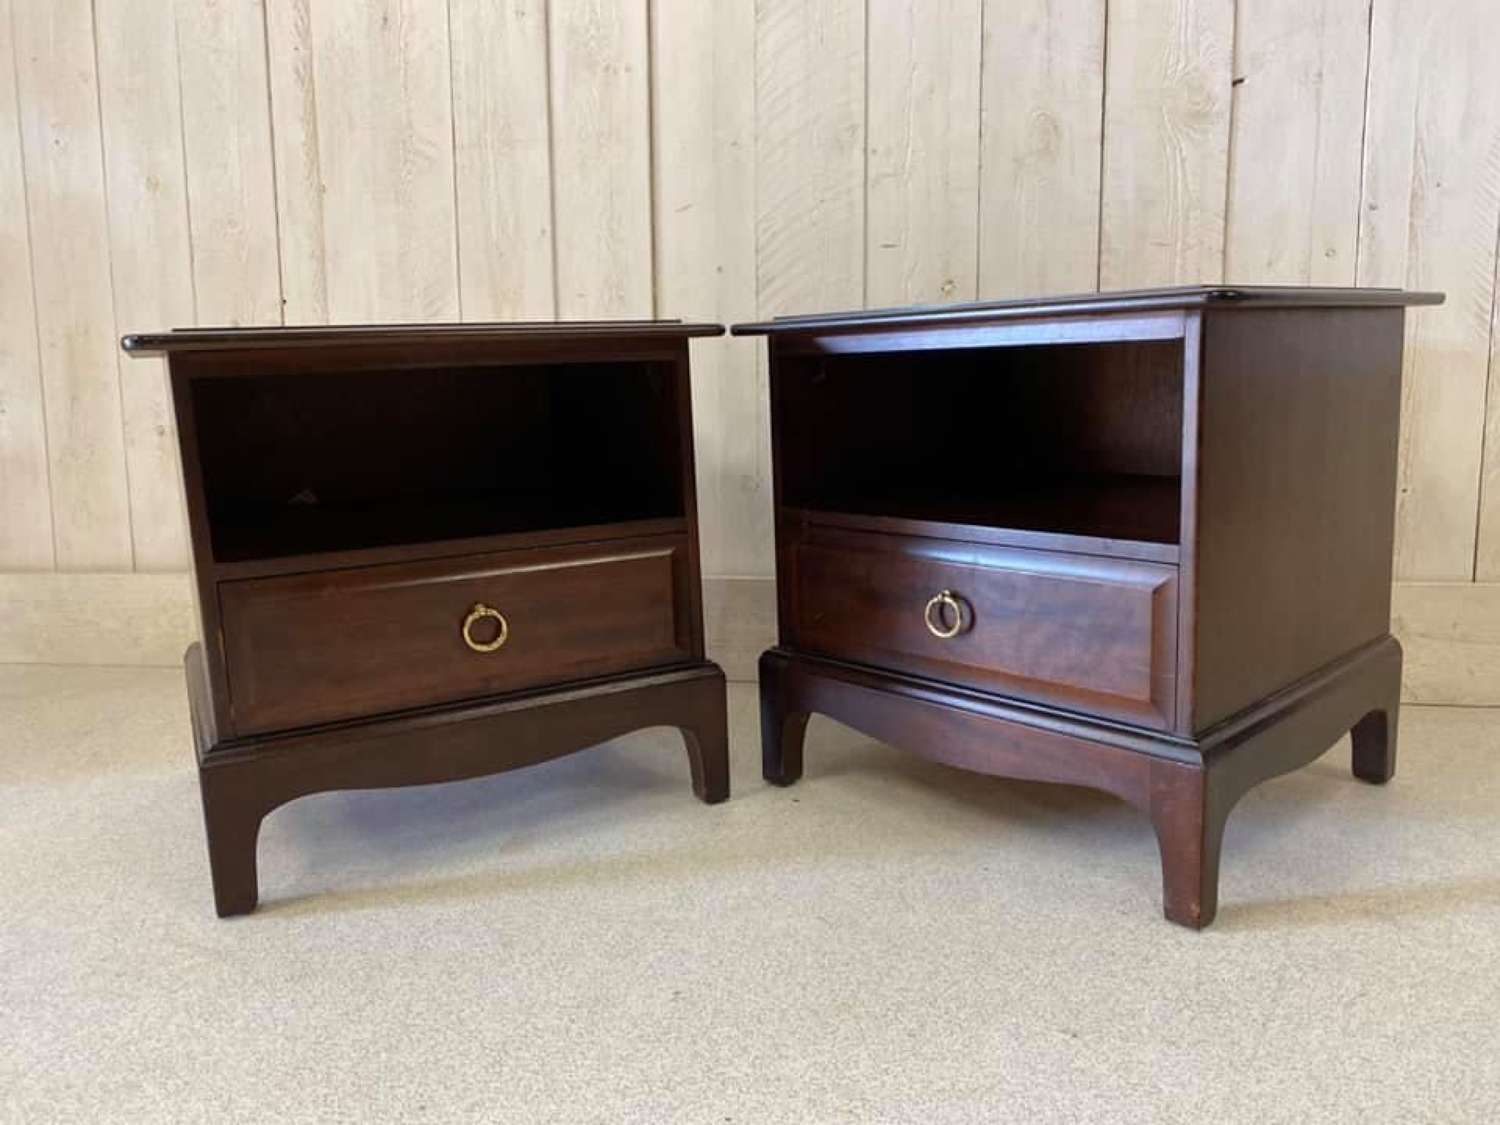 Pair of Stag Bedside Cabinets